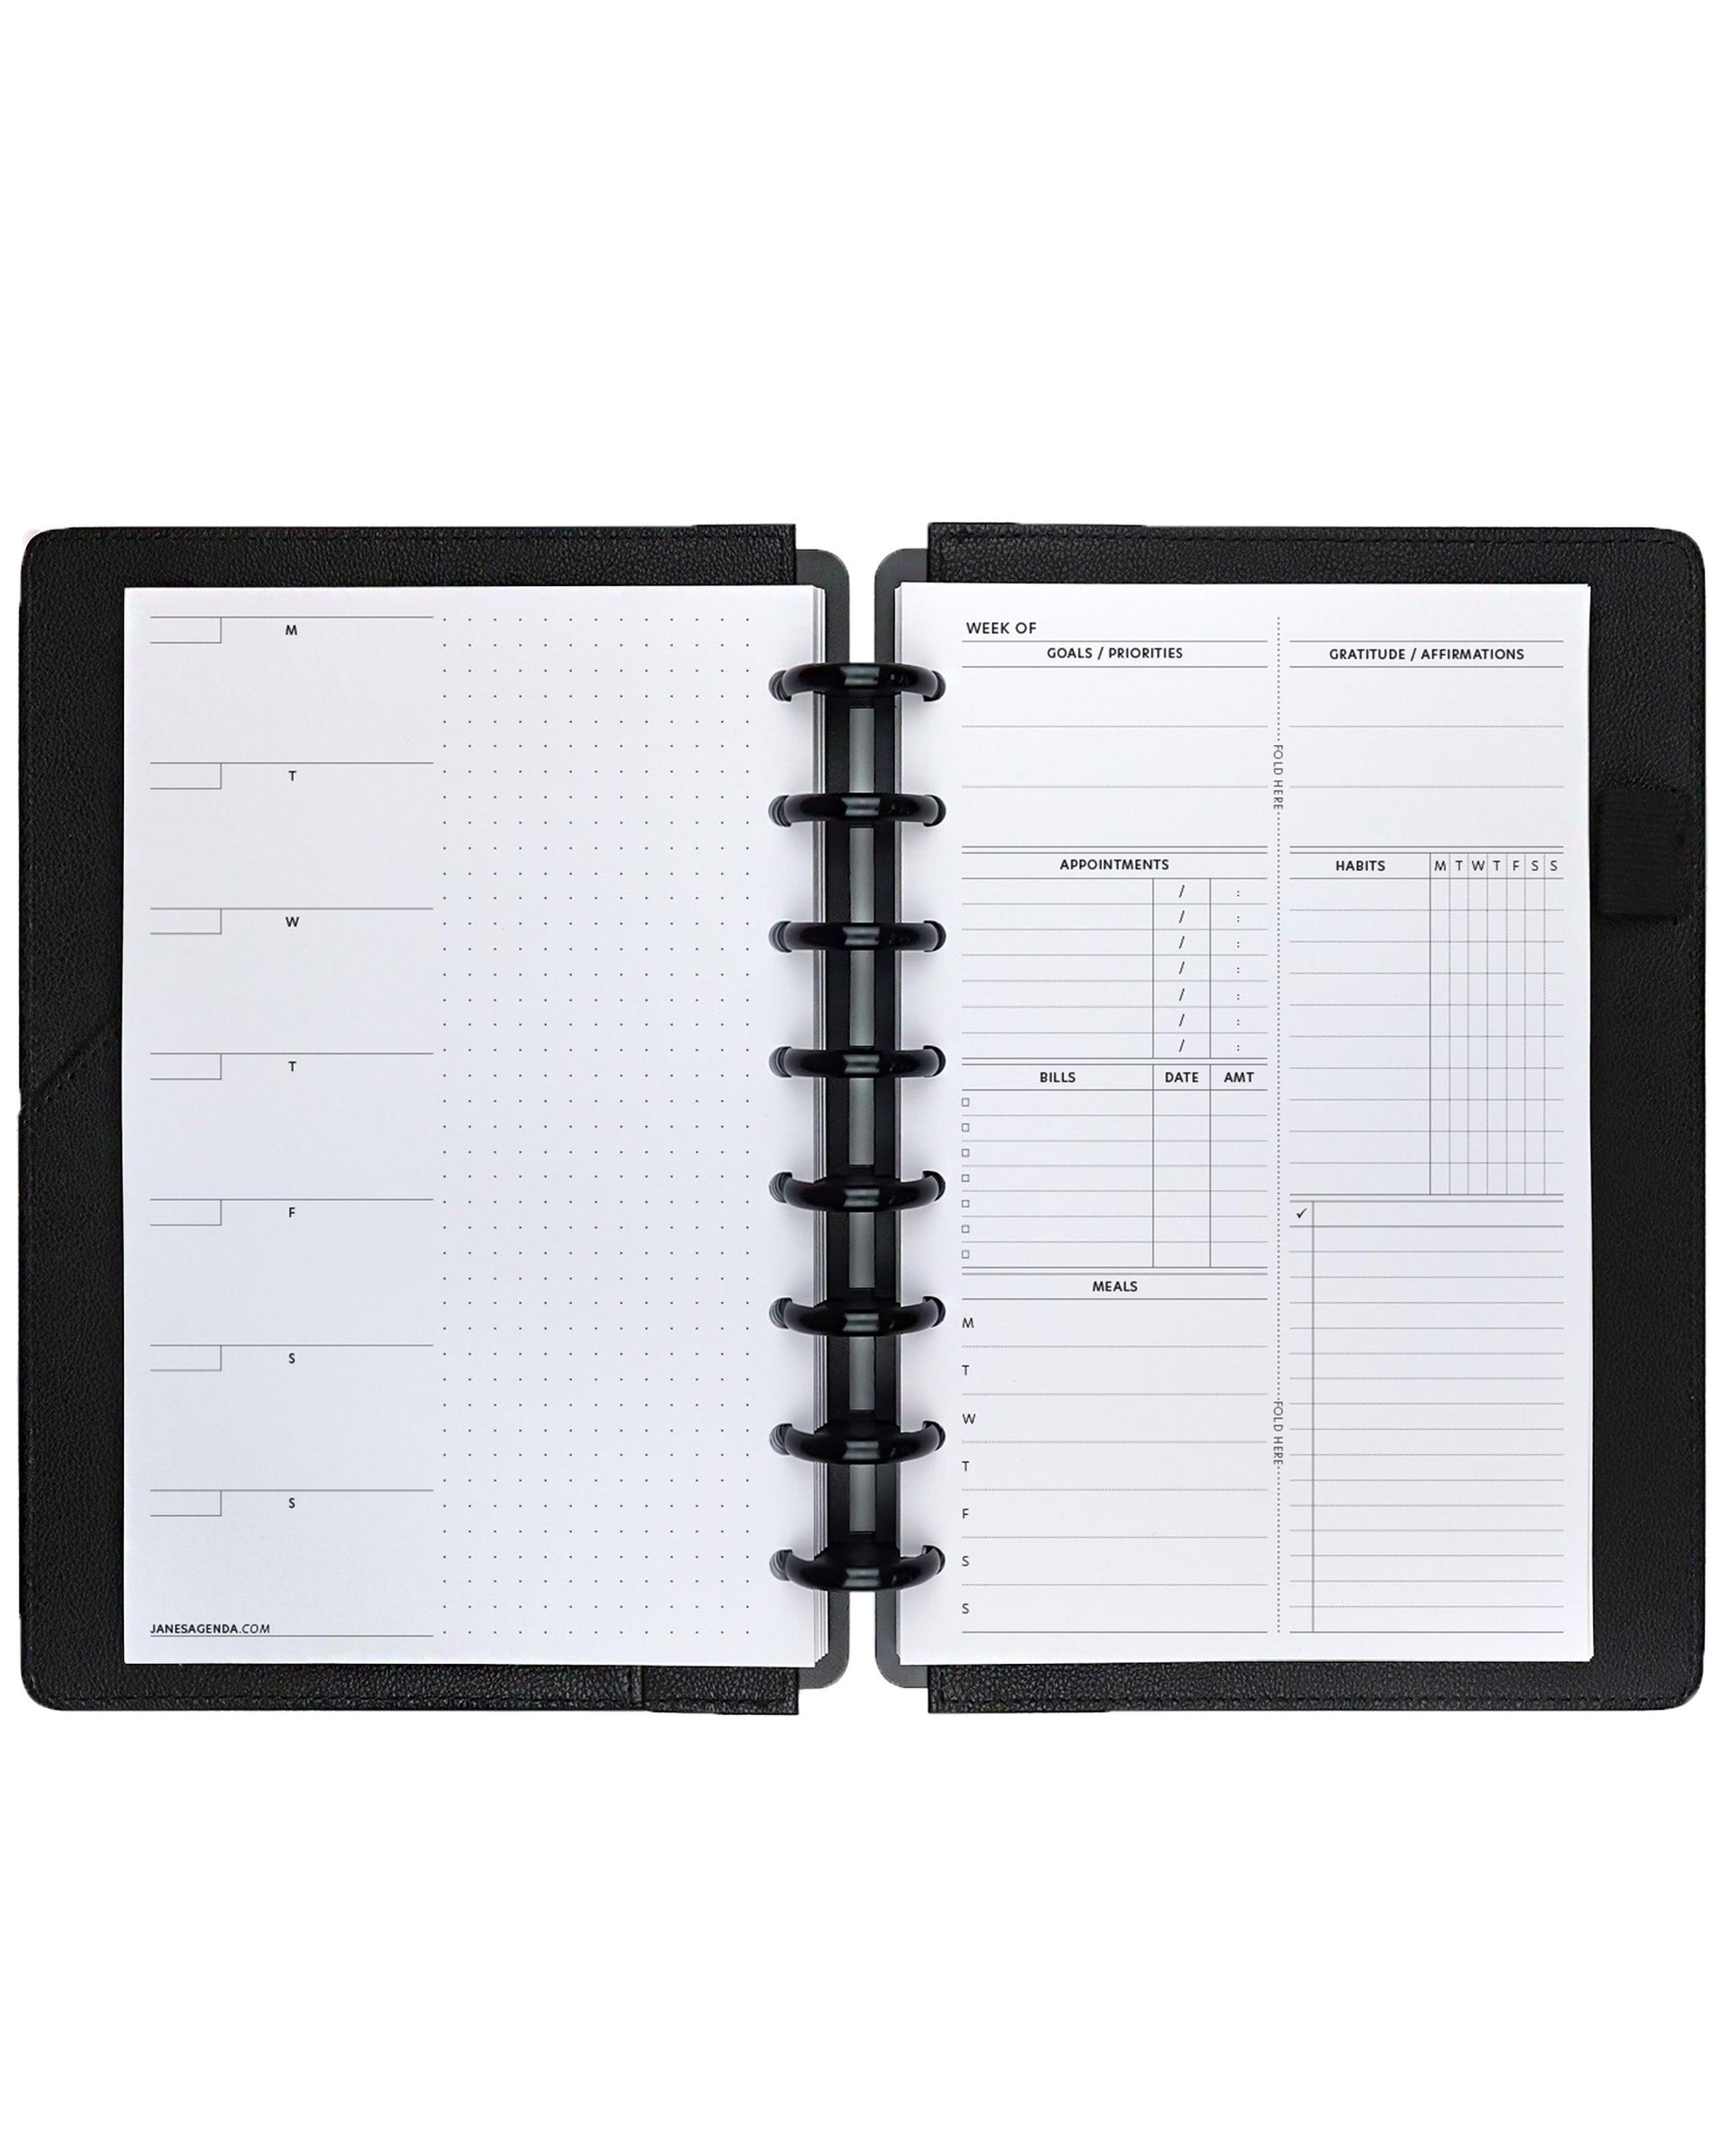 Weekly hbrrid dashboard planner insert for discbound and ringbound planner systems by Jane's Agenda.